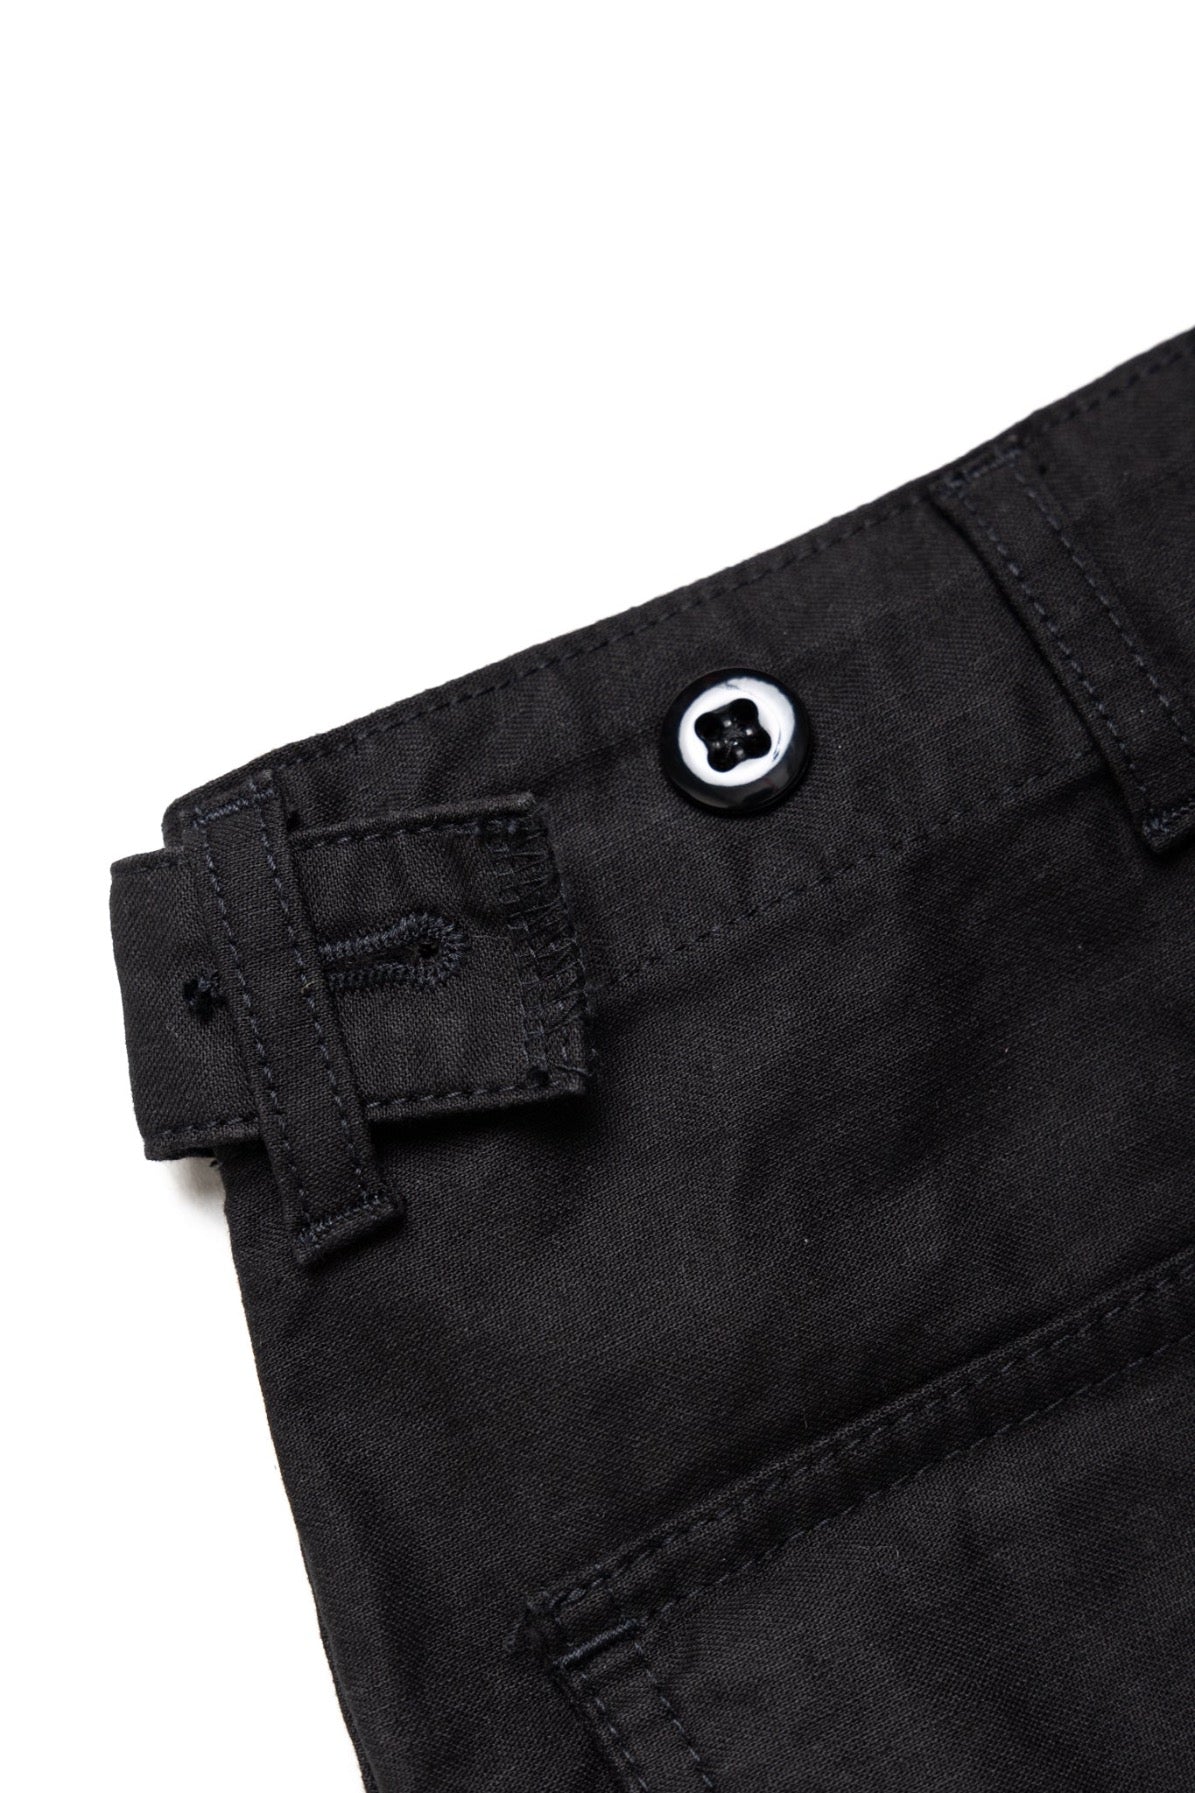 Made by Kapital are lumber pants inspired by overalls. Loose fit. 100% Cotton. Made in Japan 